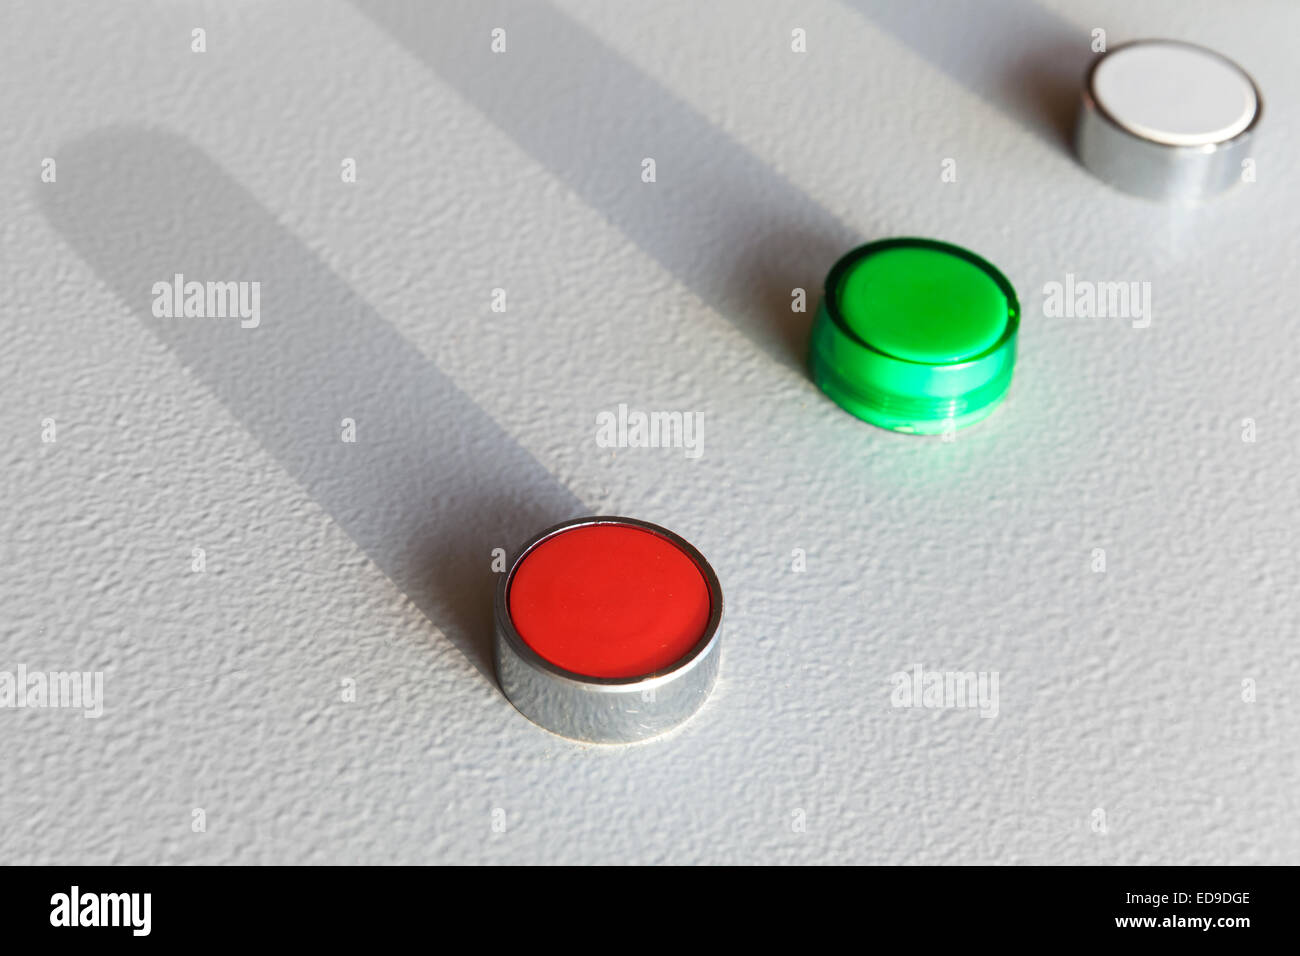 Three industrial buttons on gray steel control panel Stock Photo